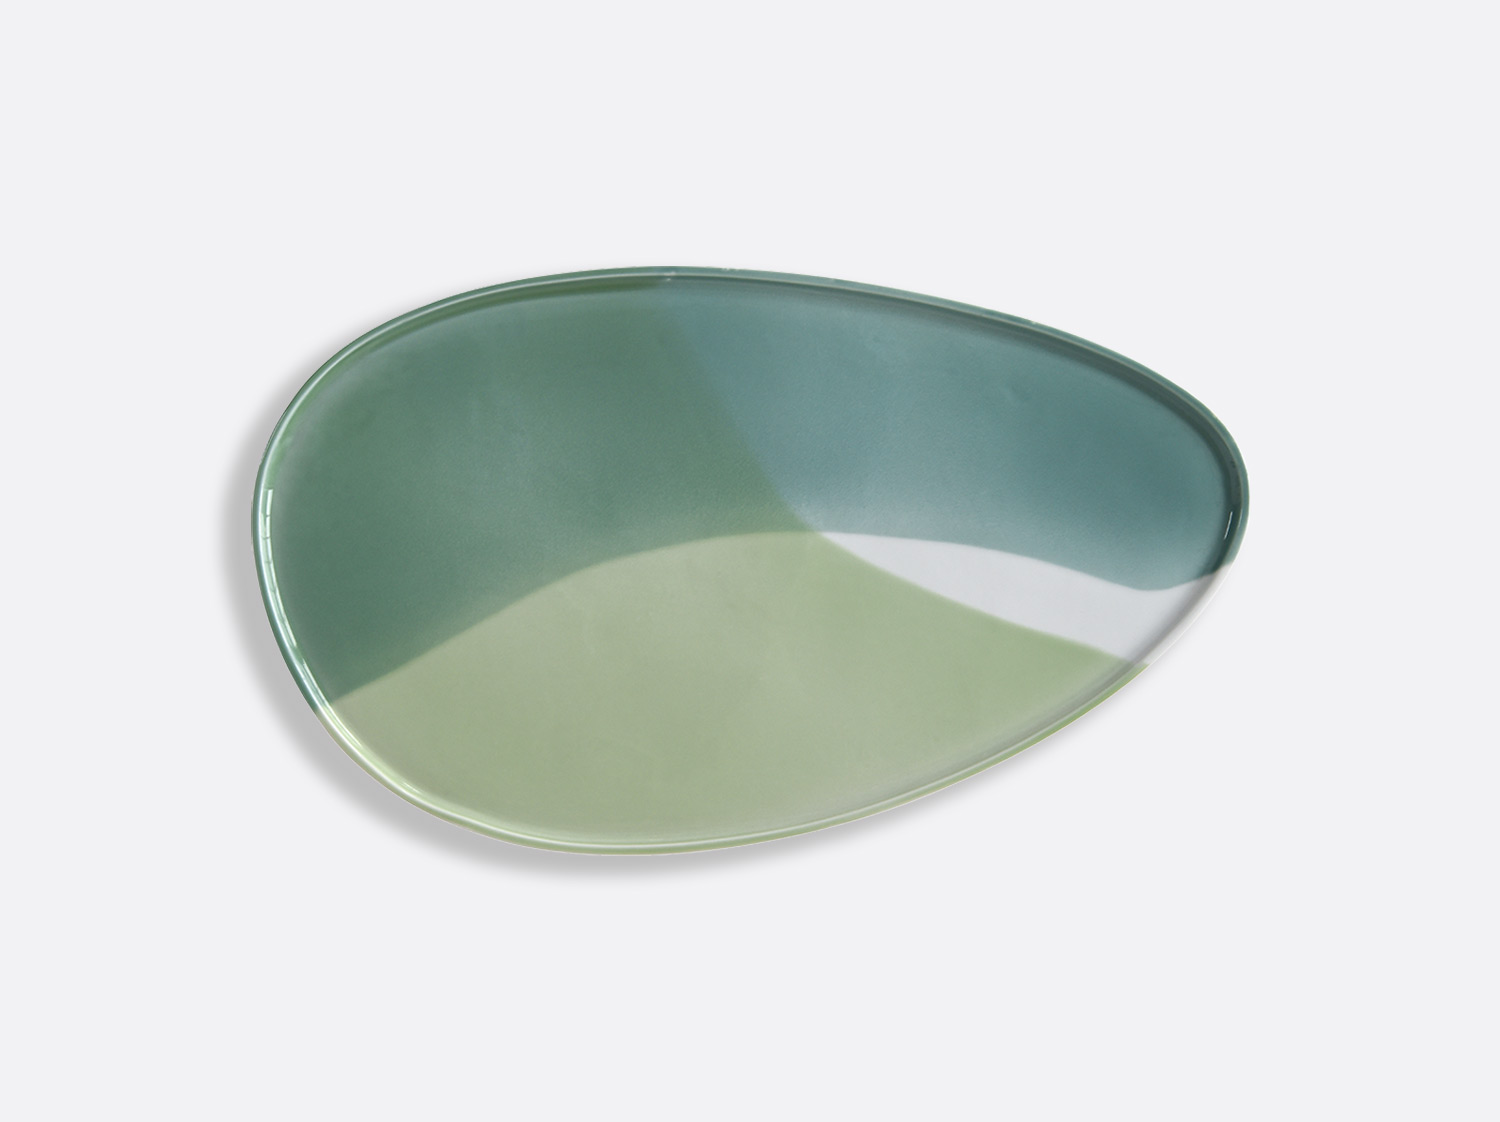 China Platter S1 blue and green of the collection Ombres - Sarah-Linda Forrer | Bernardaud